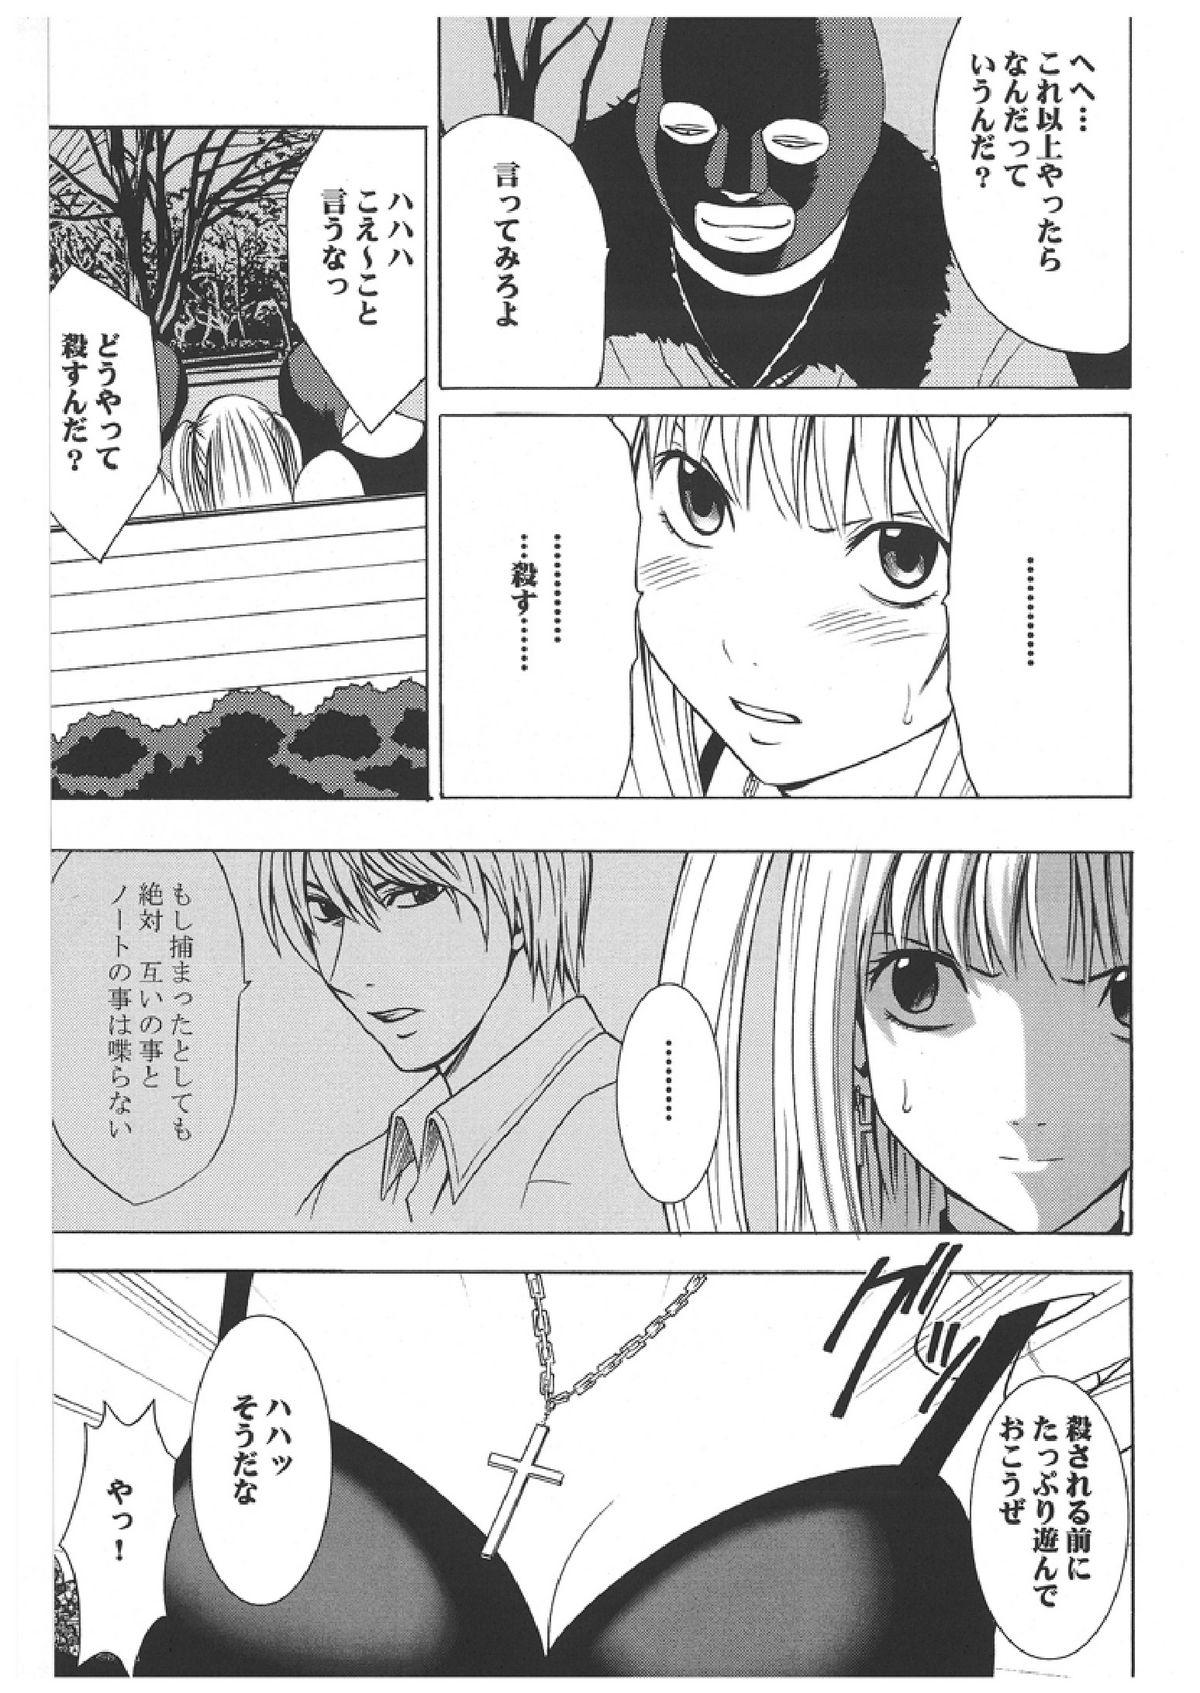 Old Death Note Soushuuhen - Death note Canadian - Page 10